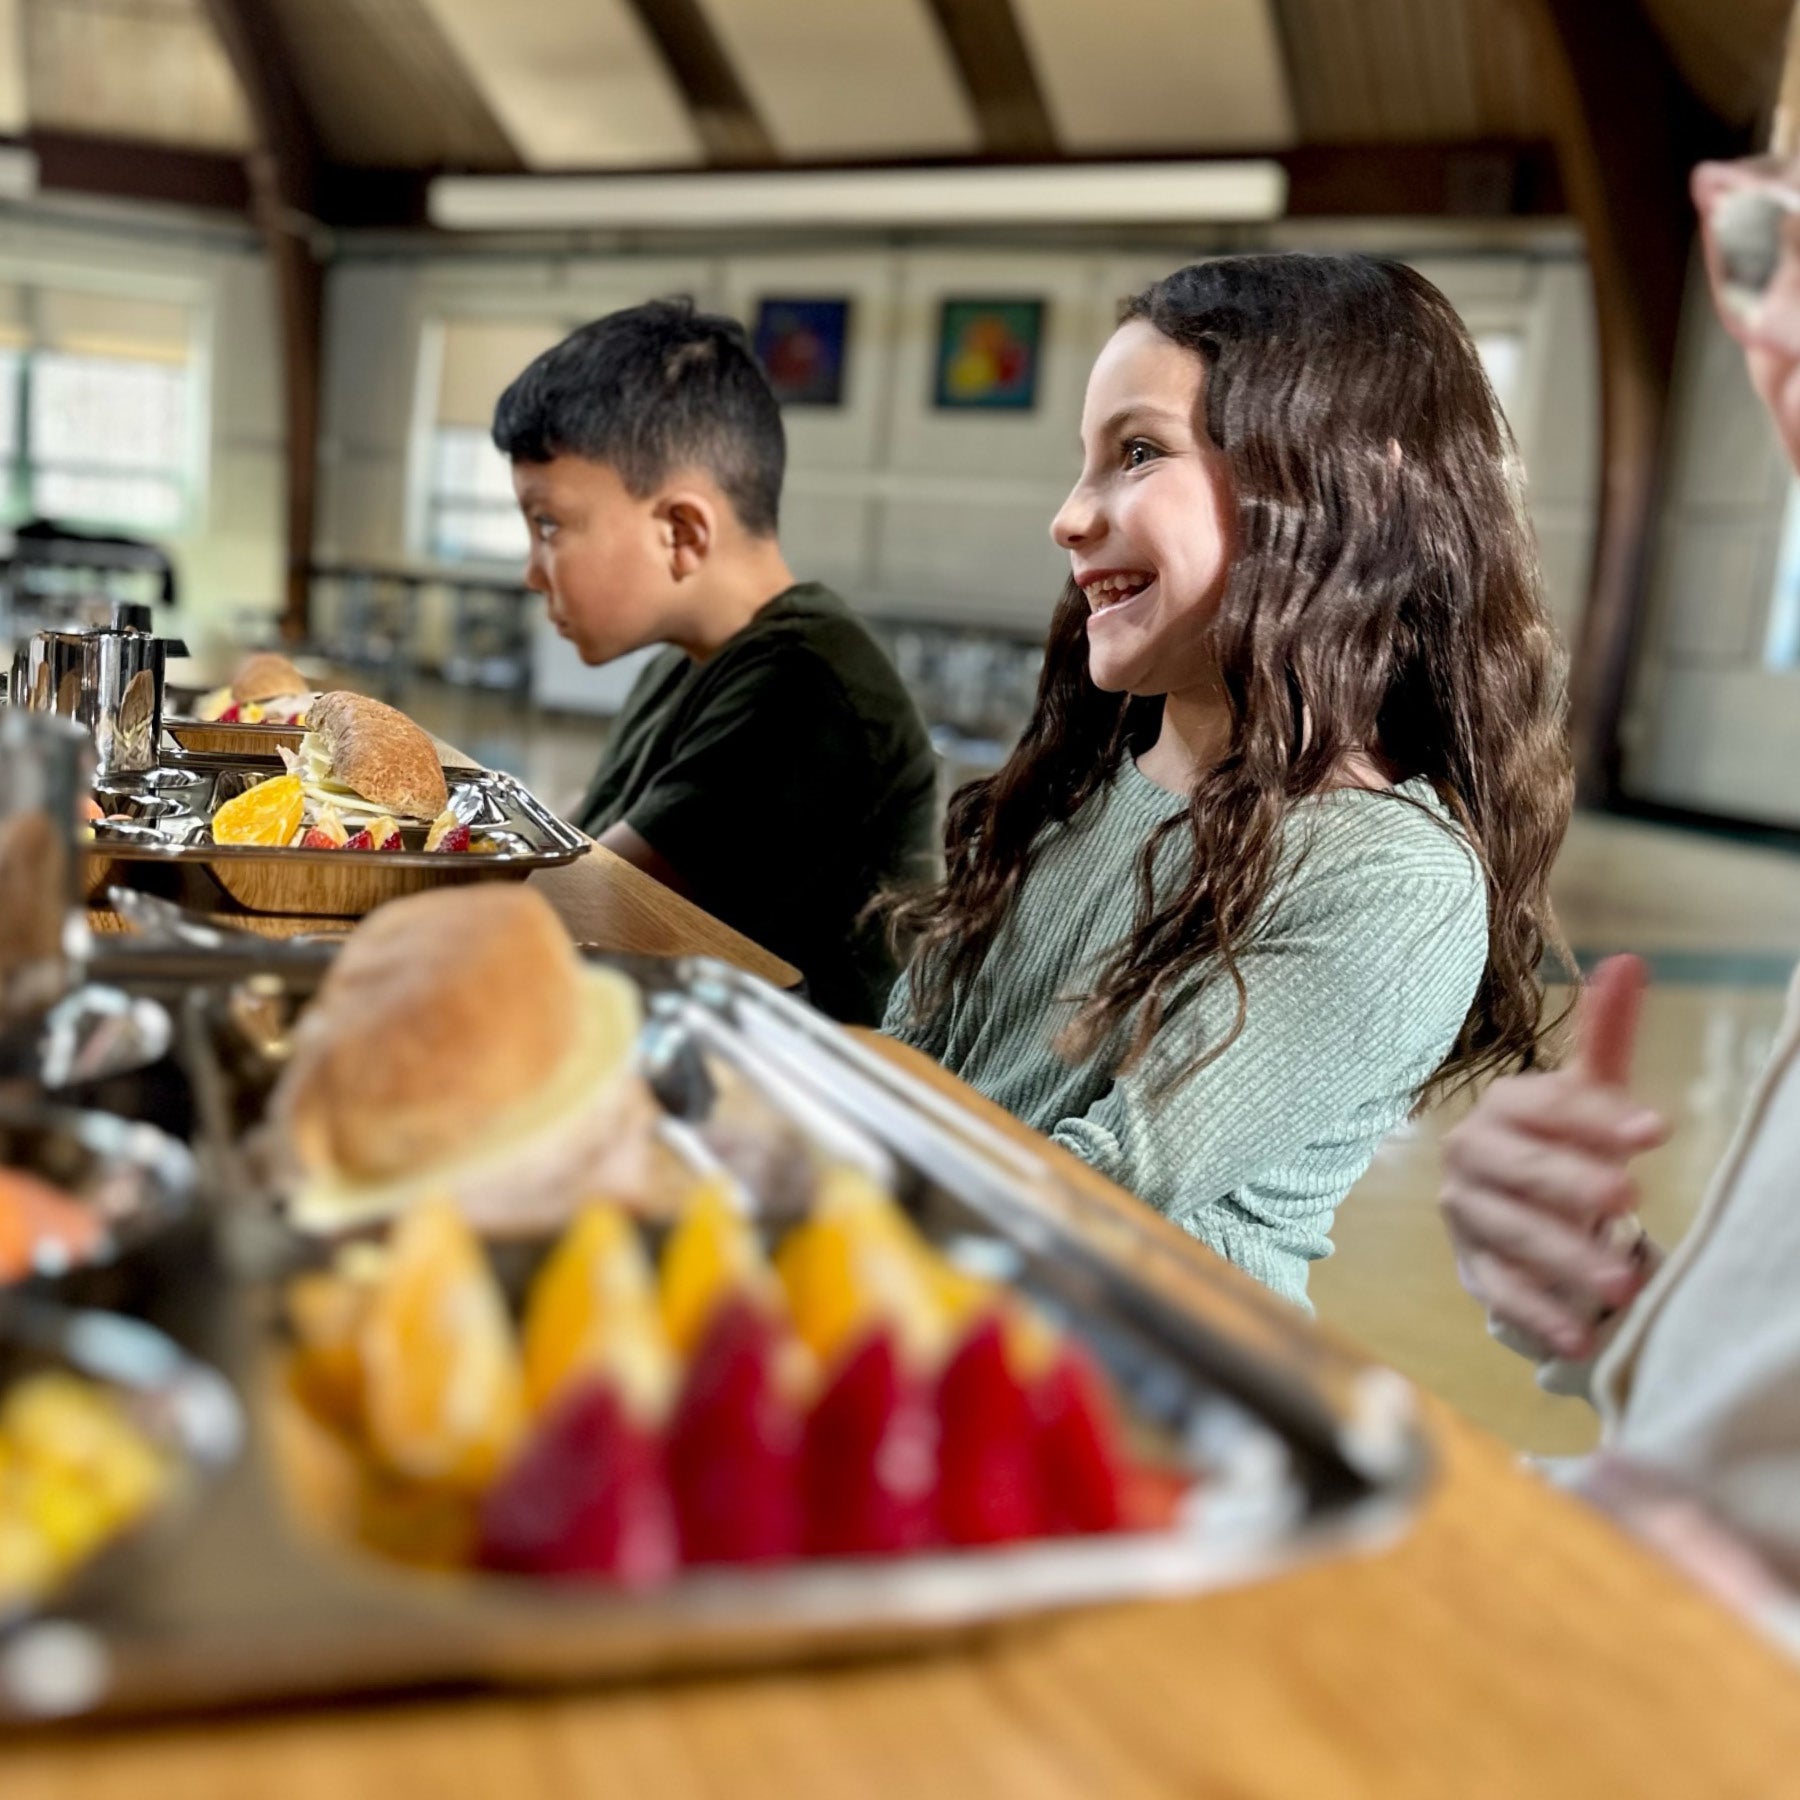 Palo Alto United School District eliminated 436,540 pieces of single-use foodware and over 8,000 pounds of waste, earning an annual net savings of $25,000.